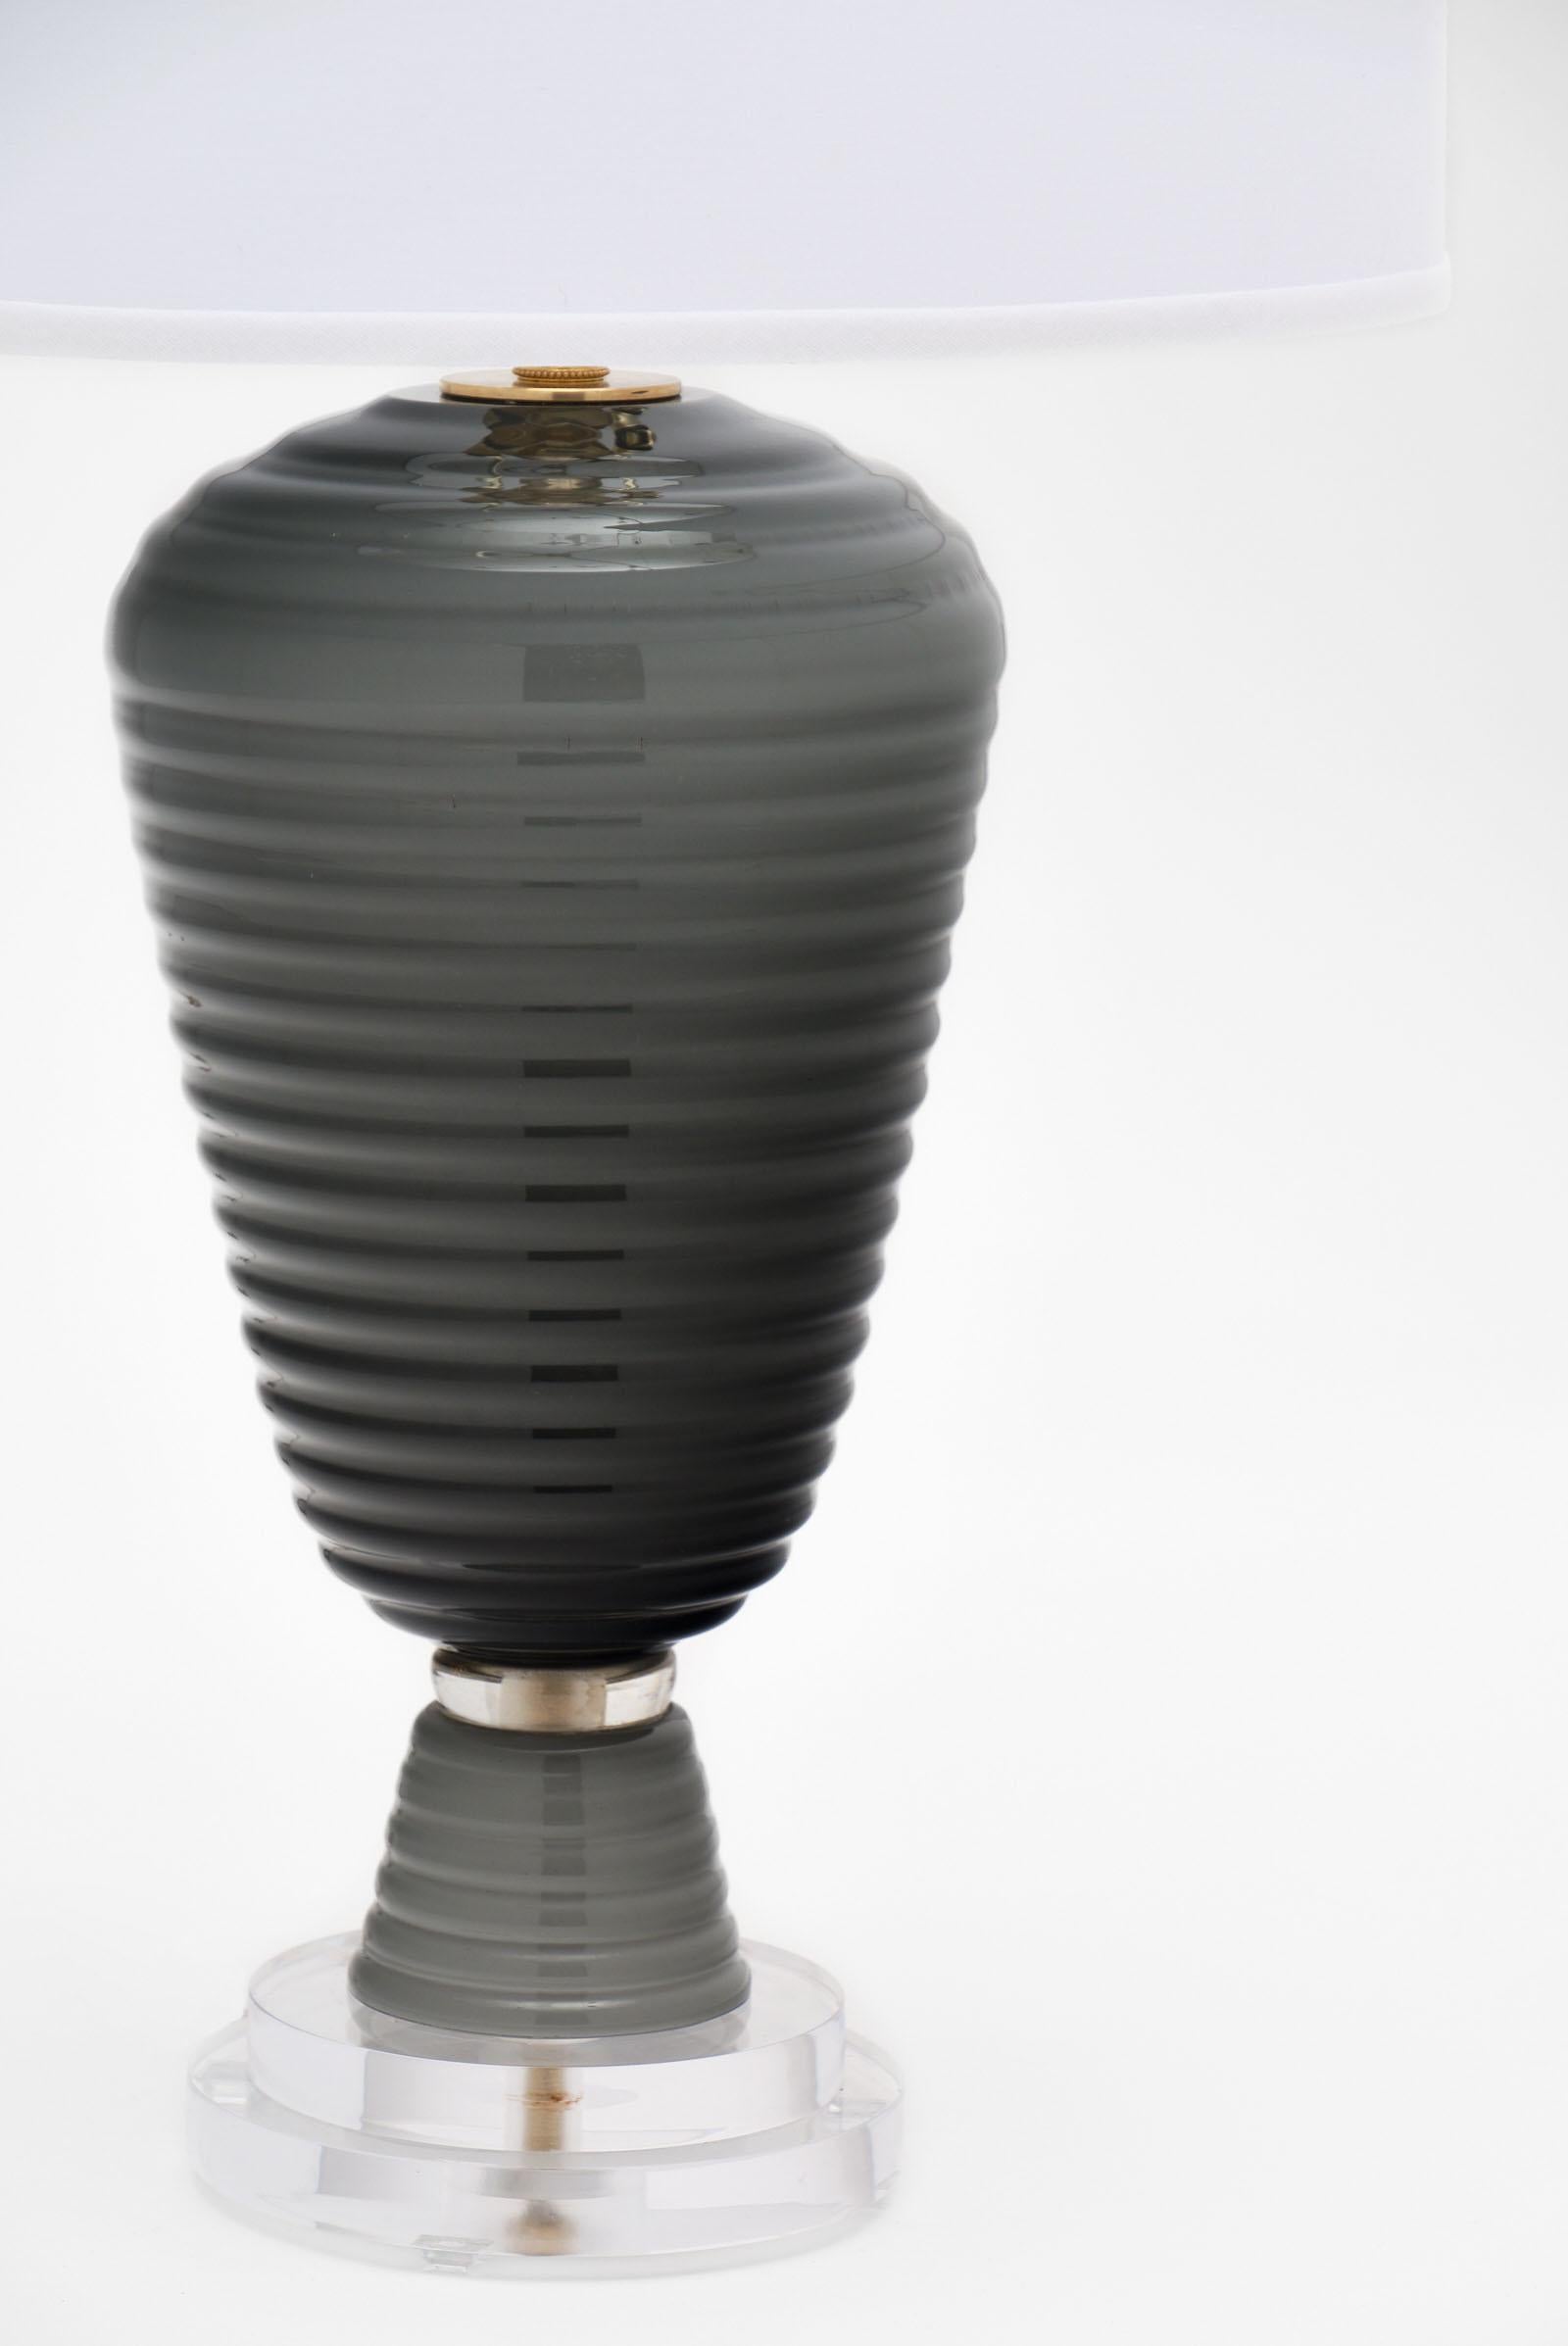 A single gray Murano glass lamp with a “beehive” shape by A. Dona in Murano. This hand blown, unique piece is mounted on a Lucite base. It has been newly wired to fit US standards.